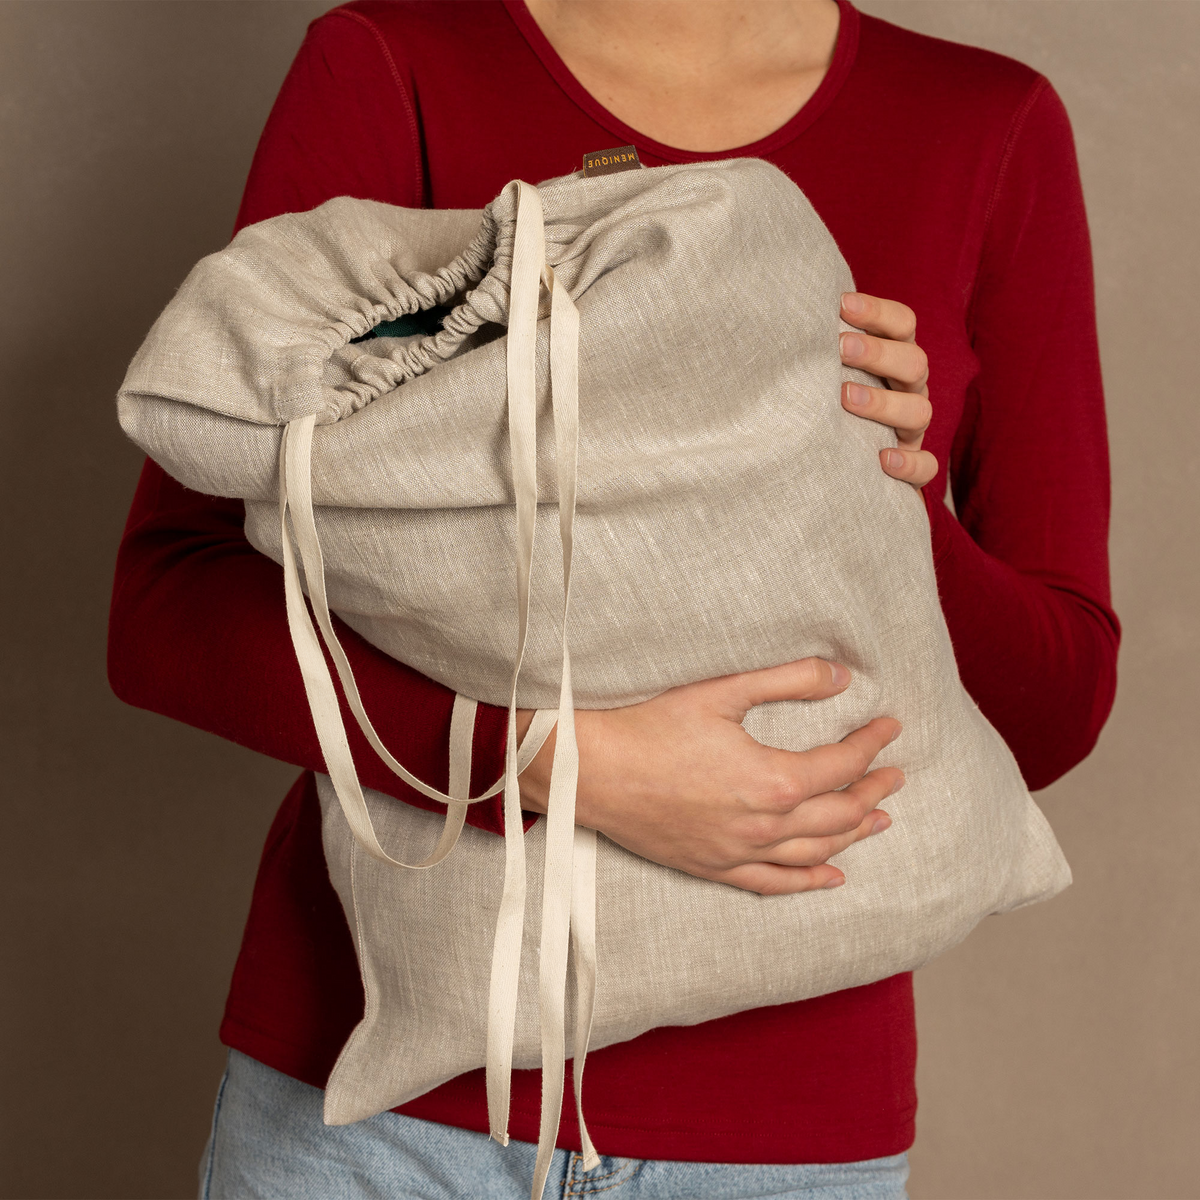 MENIQUE 100% Linen Laundry Bag with Drawstrings